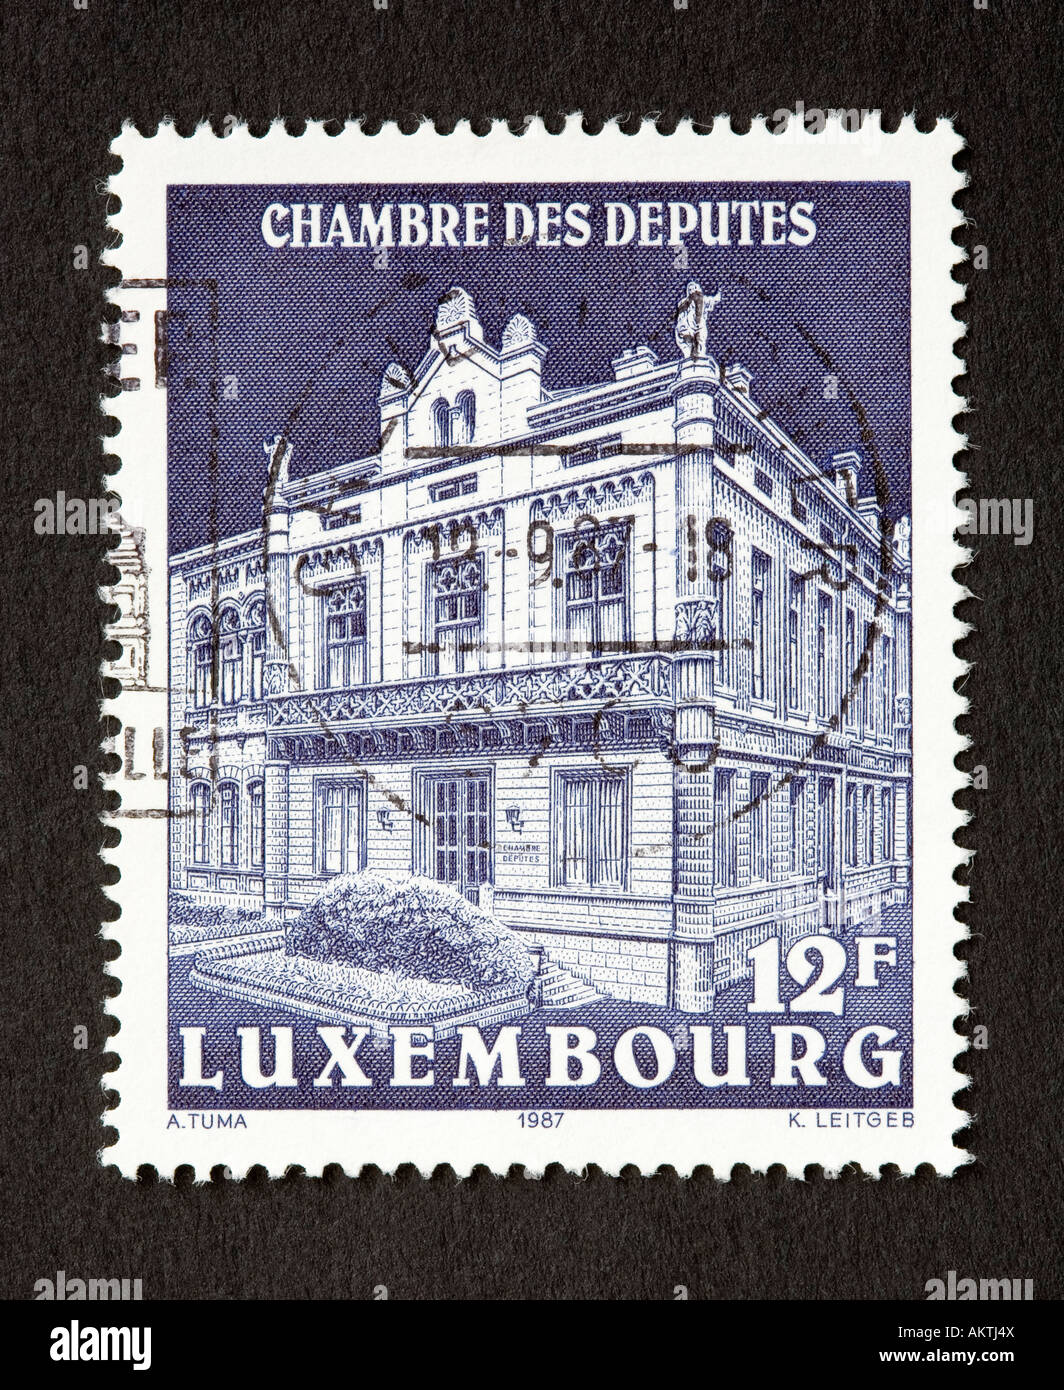 Luxembourg postage stamp Stock Photo